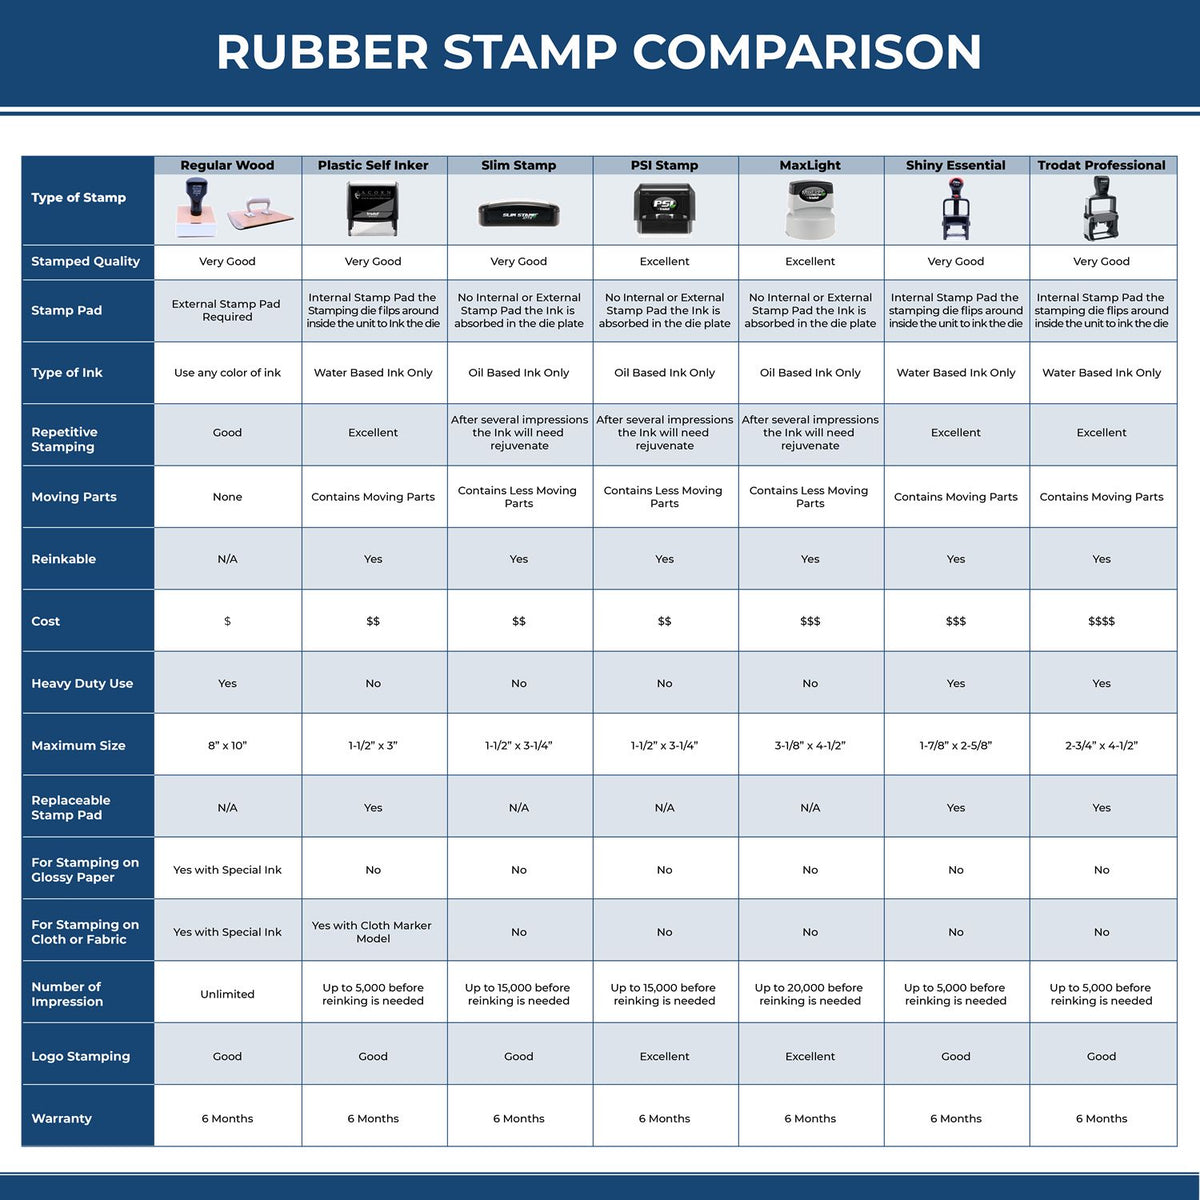 A comparison chart for the different types of mount models available for the Premium MaxLight Pre-Inked Kansas Landscape Architectural Stamp.